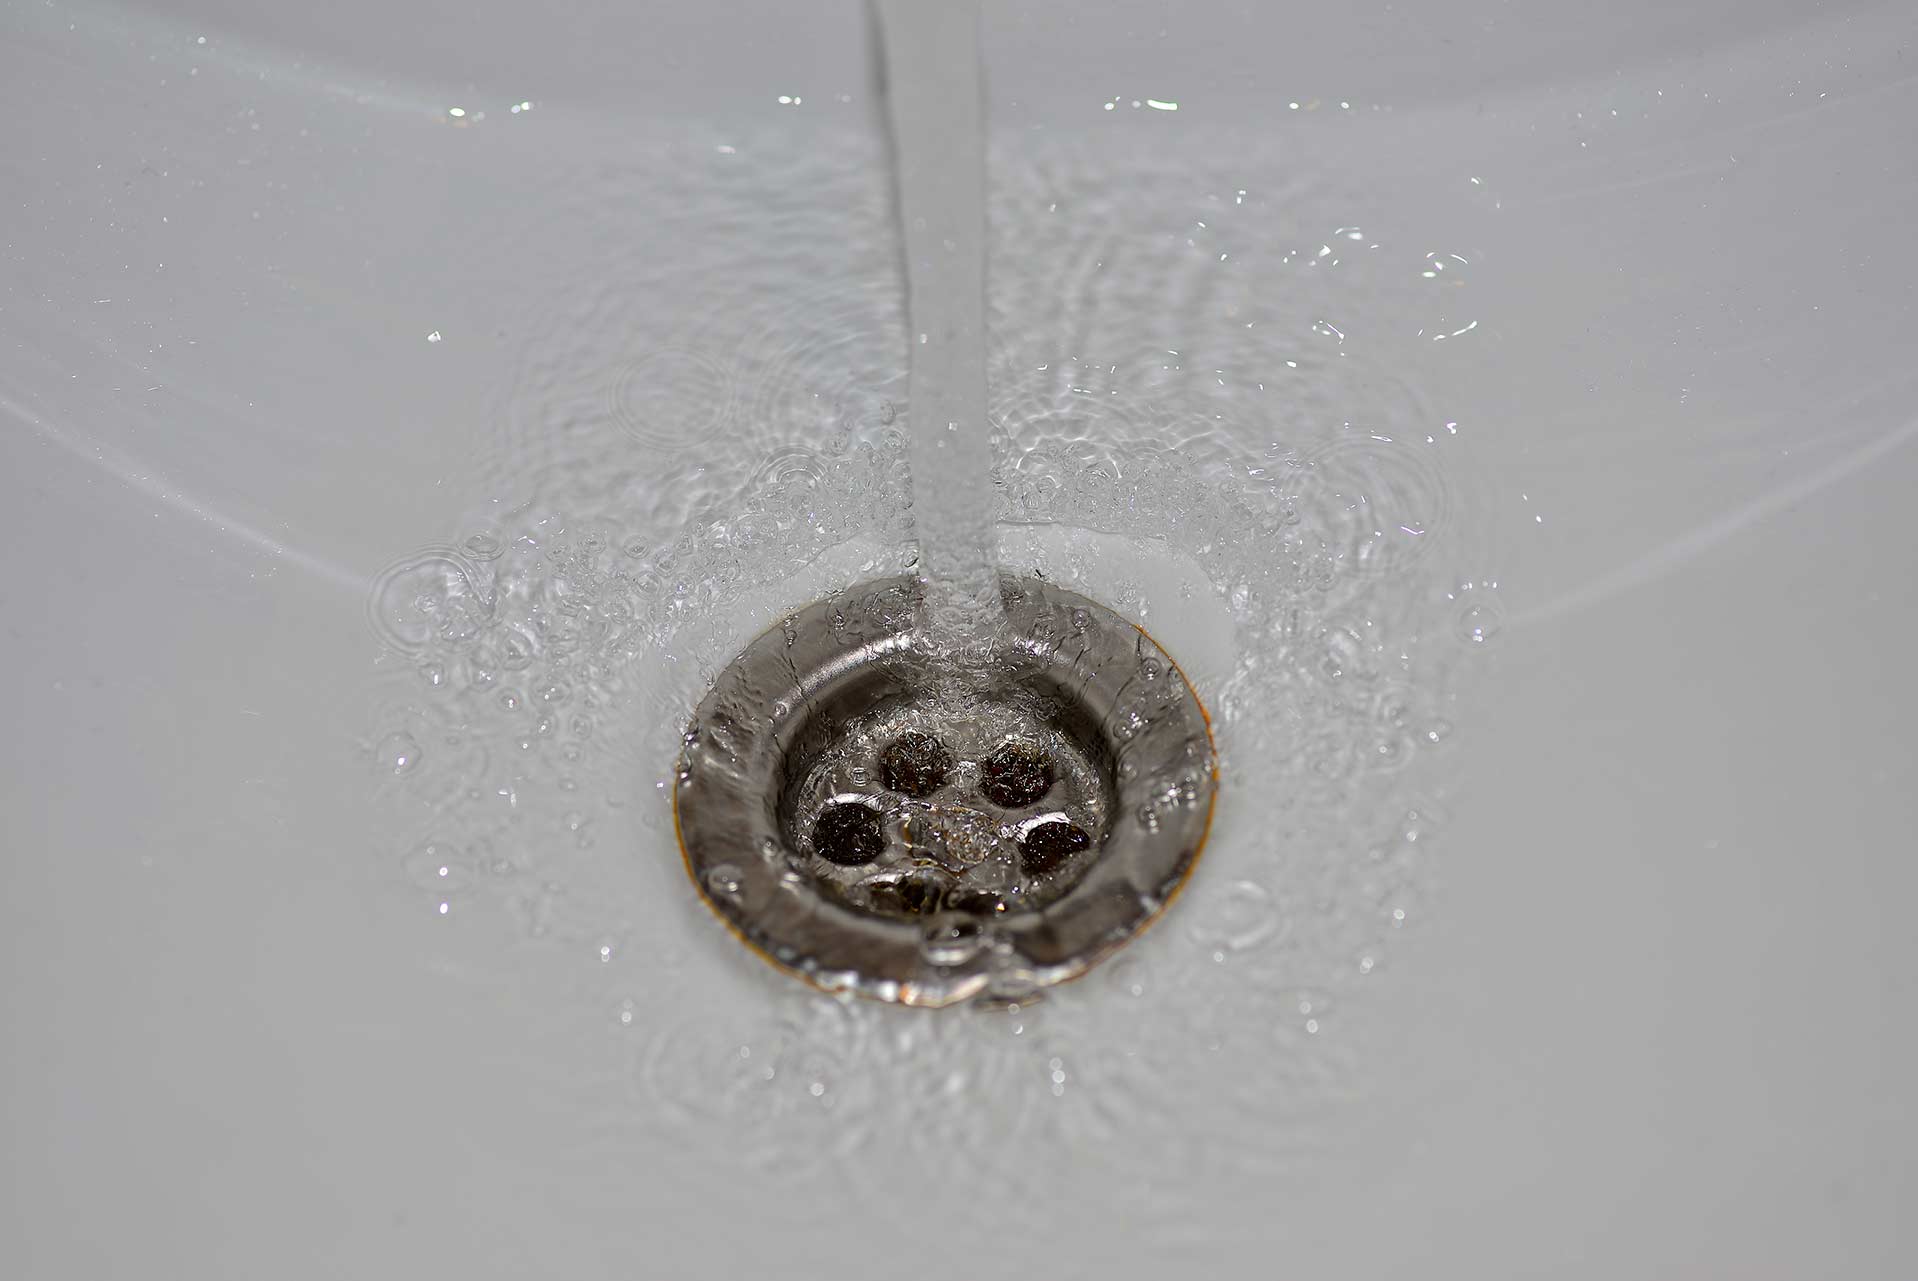 A2B Drains provides services to unblock blocked sinks and drains for properties in Bury St Edmunds.